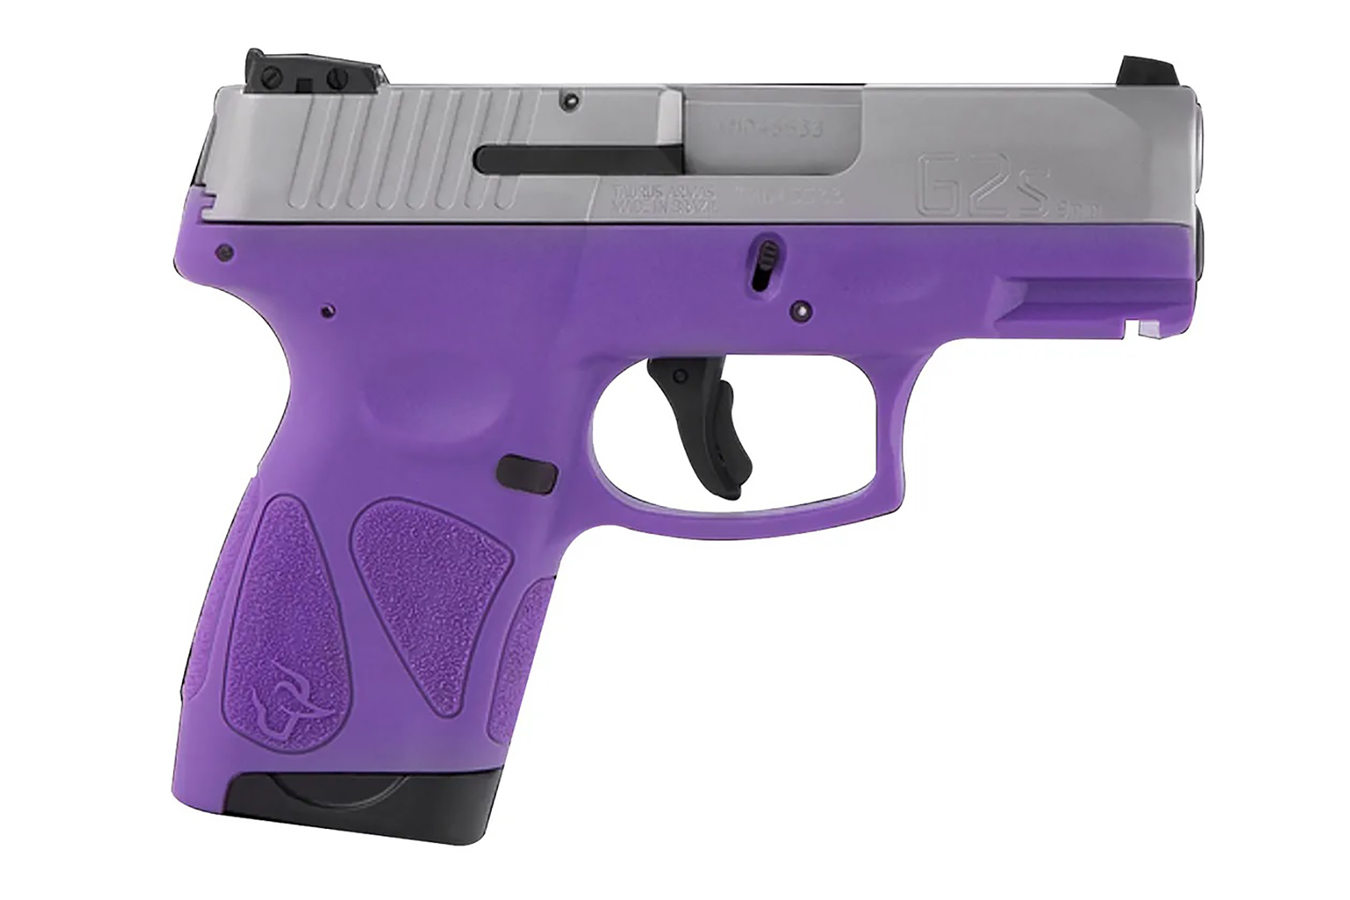 No. 13 Best Selling: TAURUS G2S 9MM SEMI-AUTO PISTOL WITH DARK PURPLE FRAME AND SILVER SLIDE